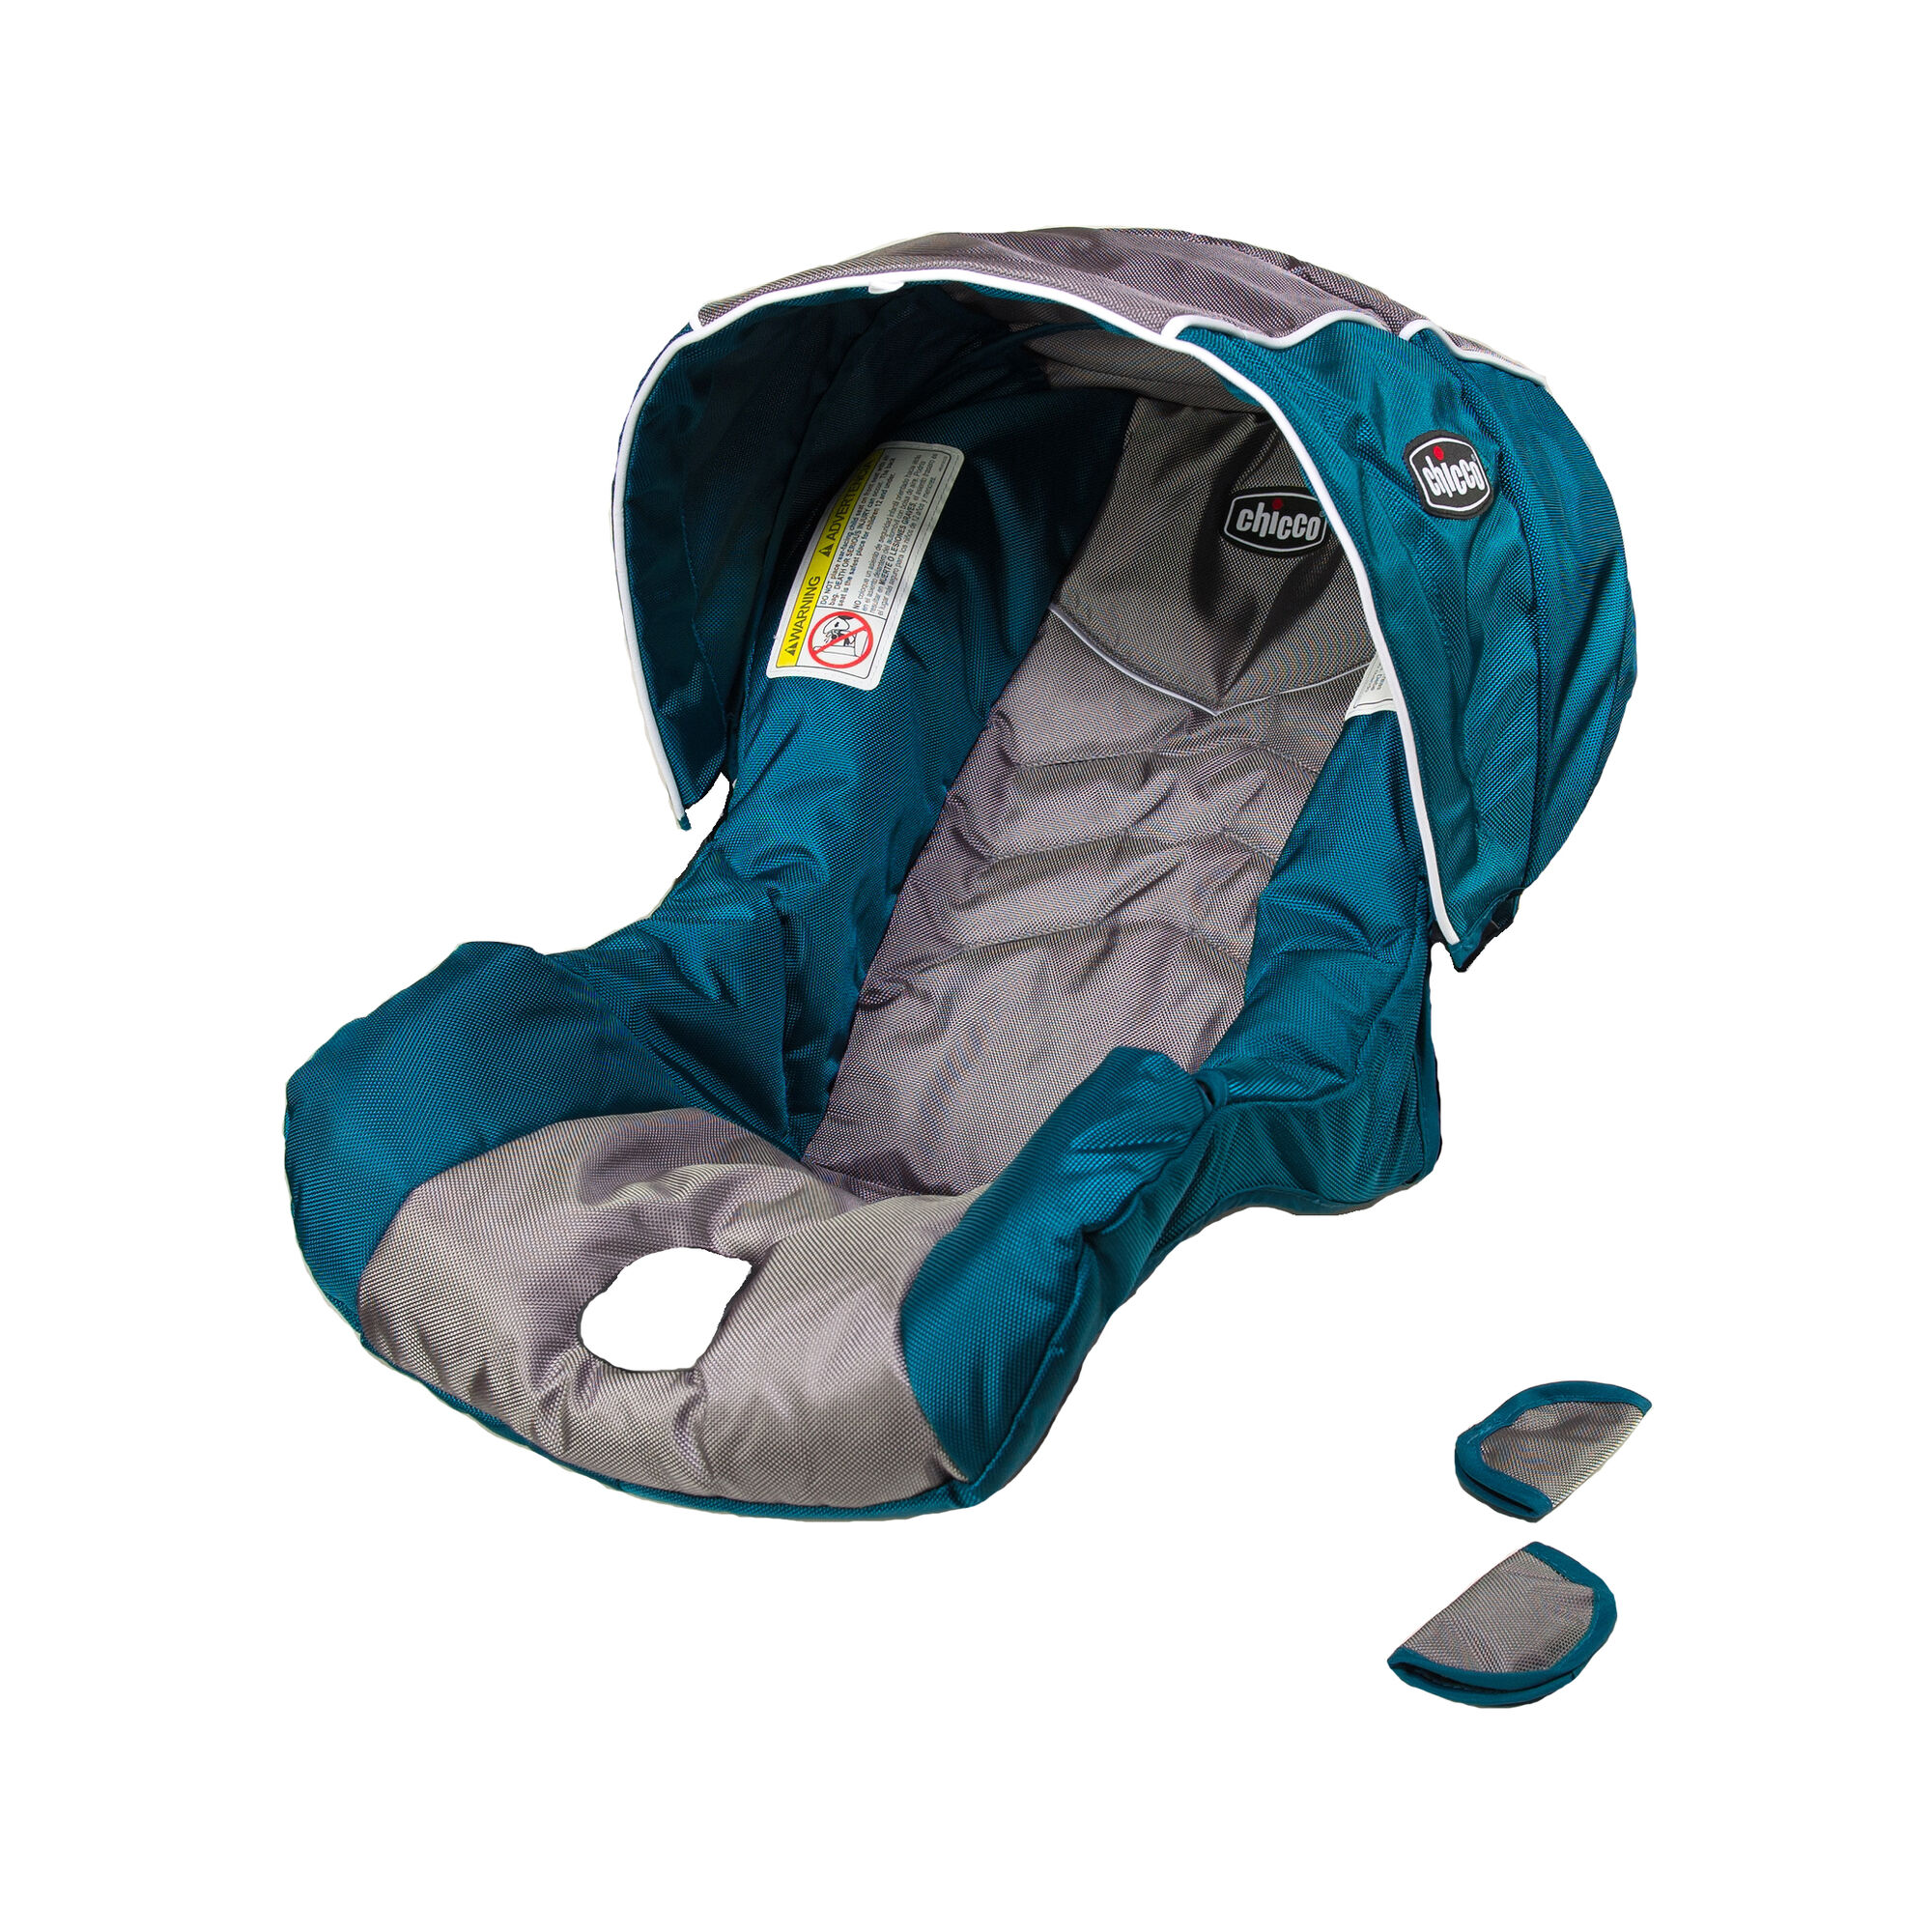 KeyFit 30 Seat Cover, Canopy, and Pads | Chicco